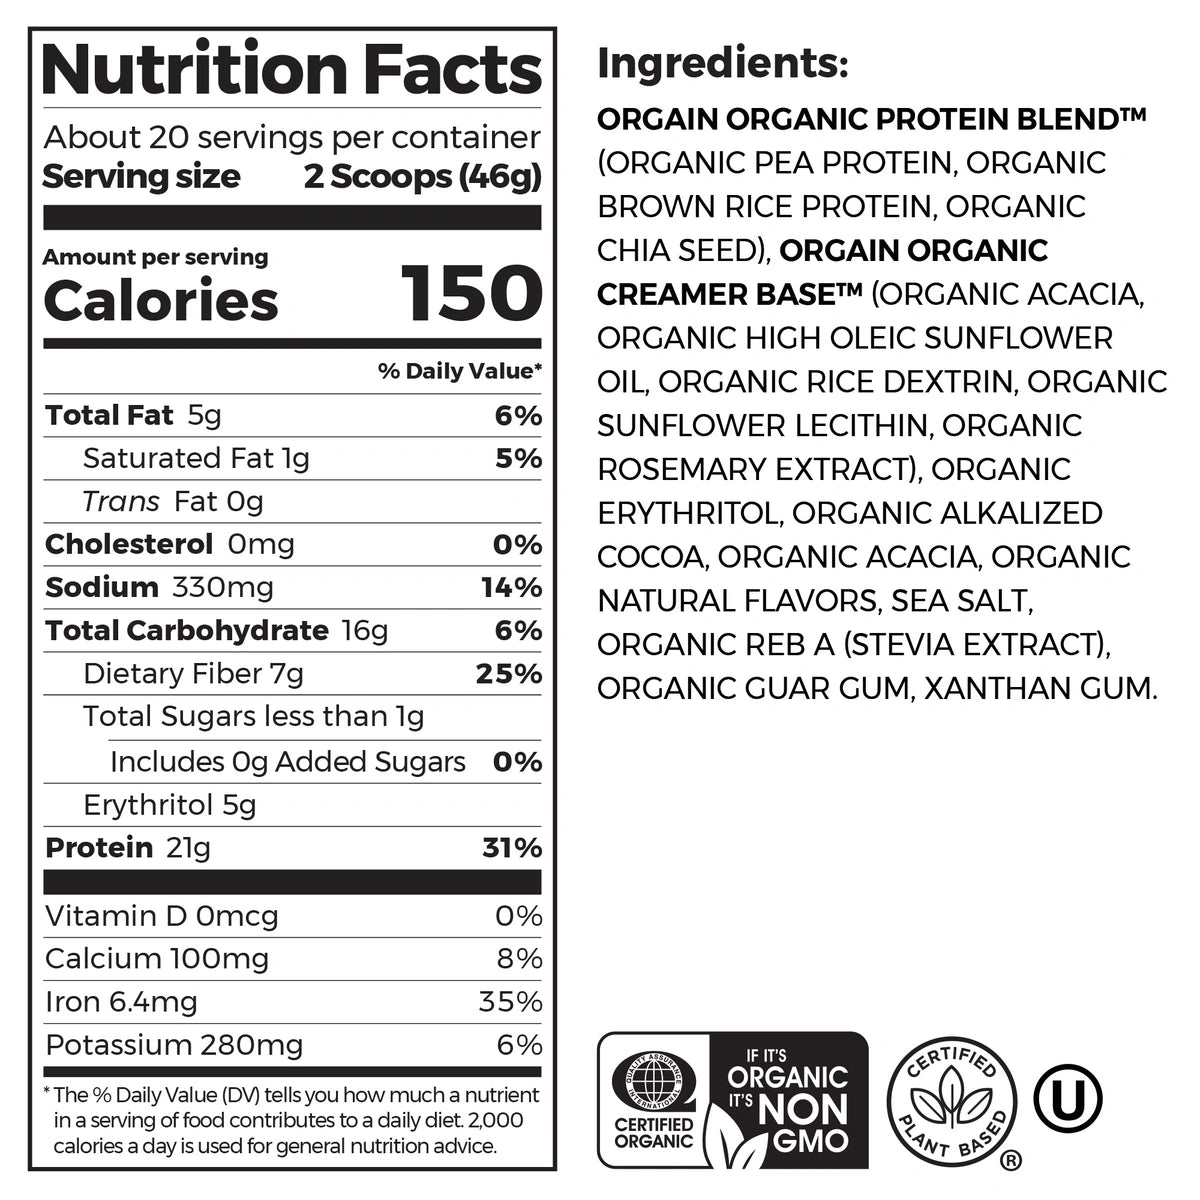 Nutrition Fact Panel and List of Ingredients for Organic Protein Plant Based Protein powder in creamy chocolate fudge flavor 2lb size